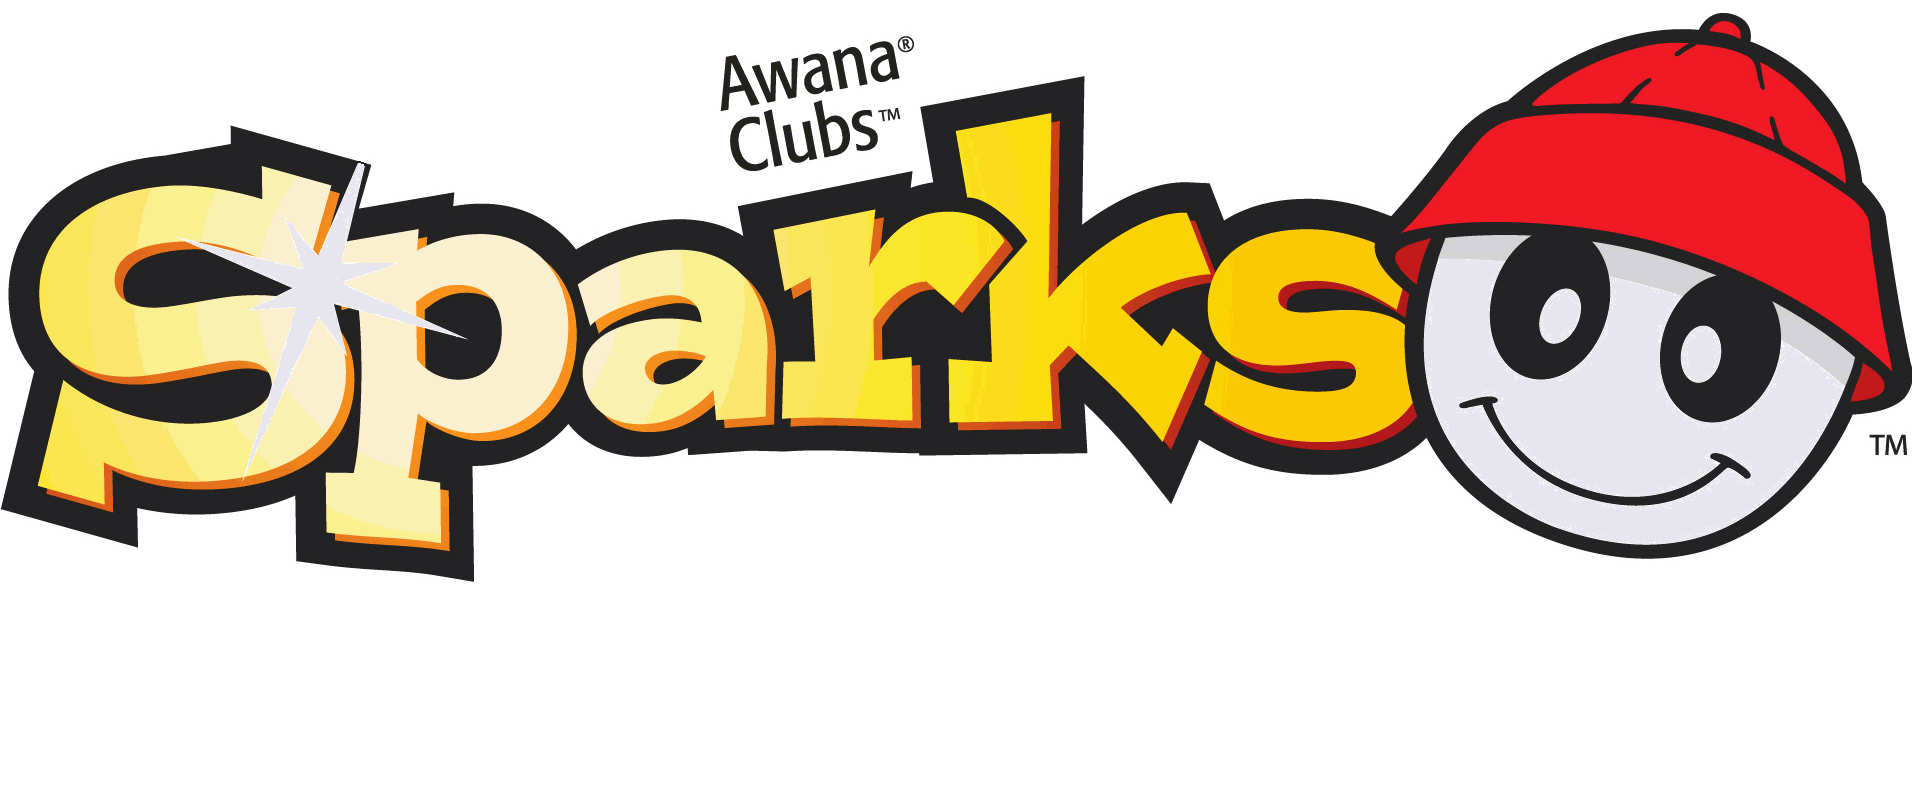 Awana clipart sparks. Free cliparts download clip